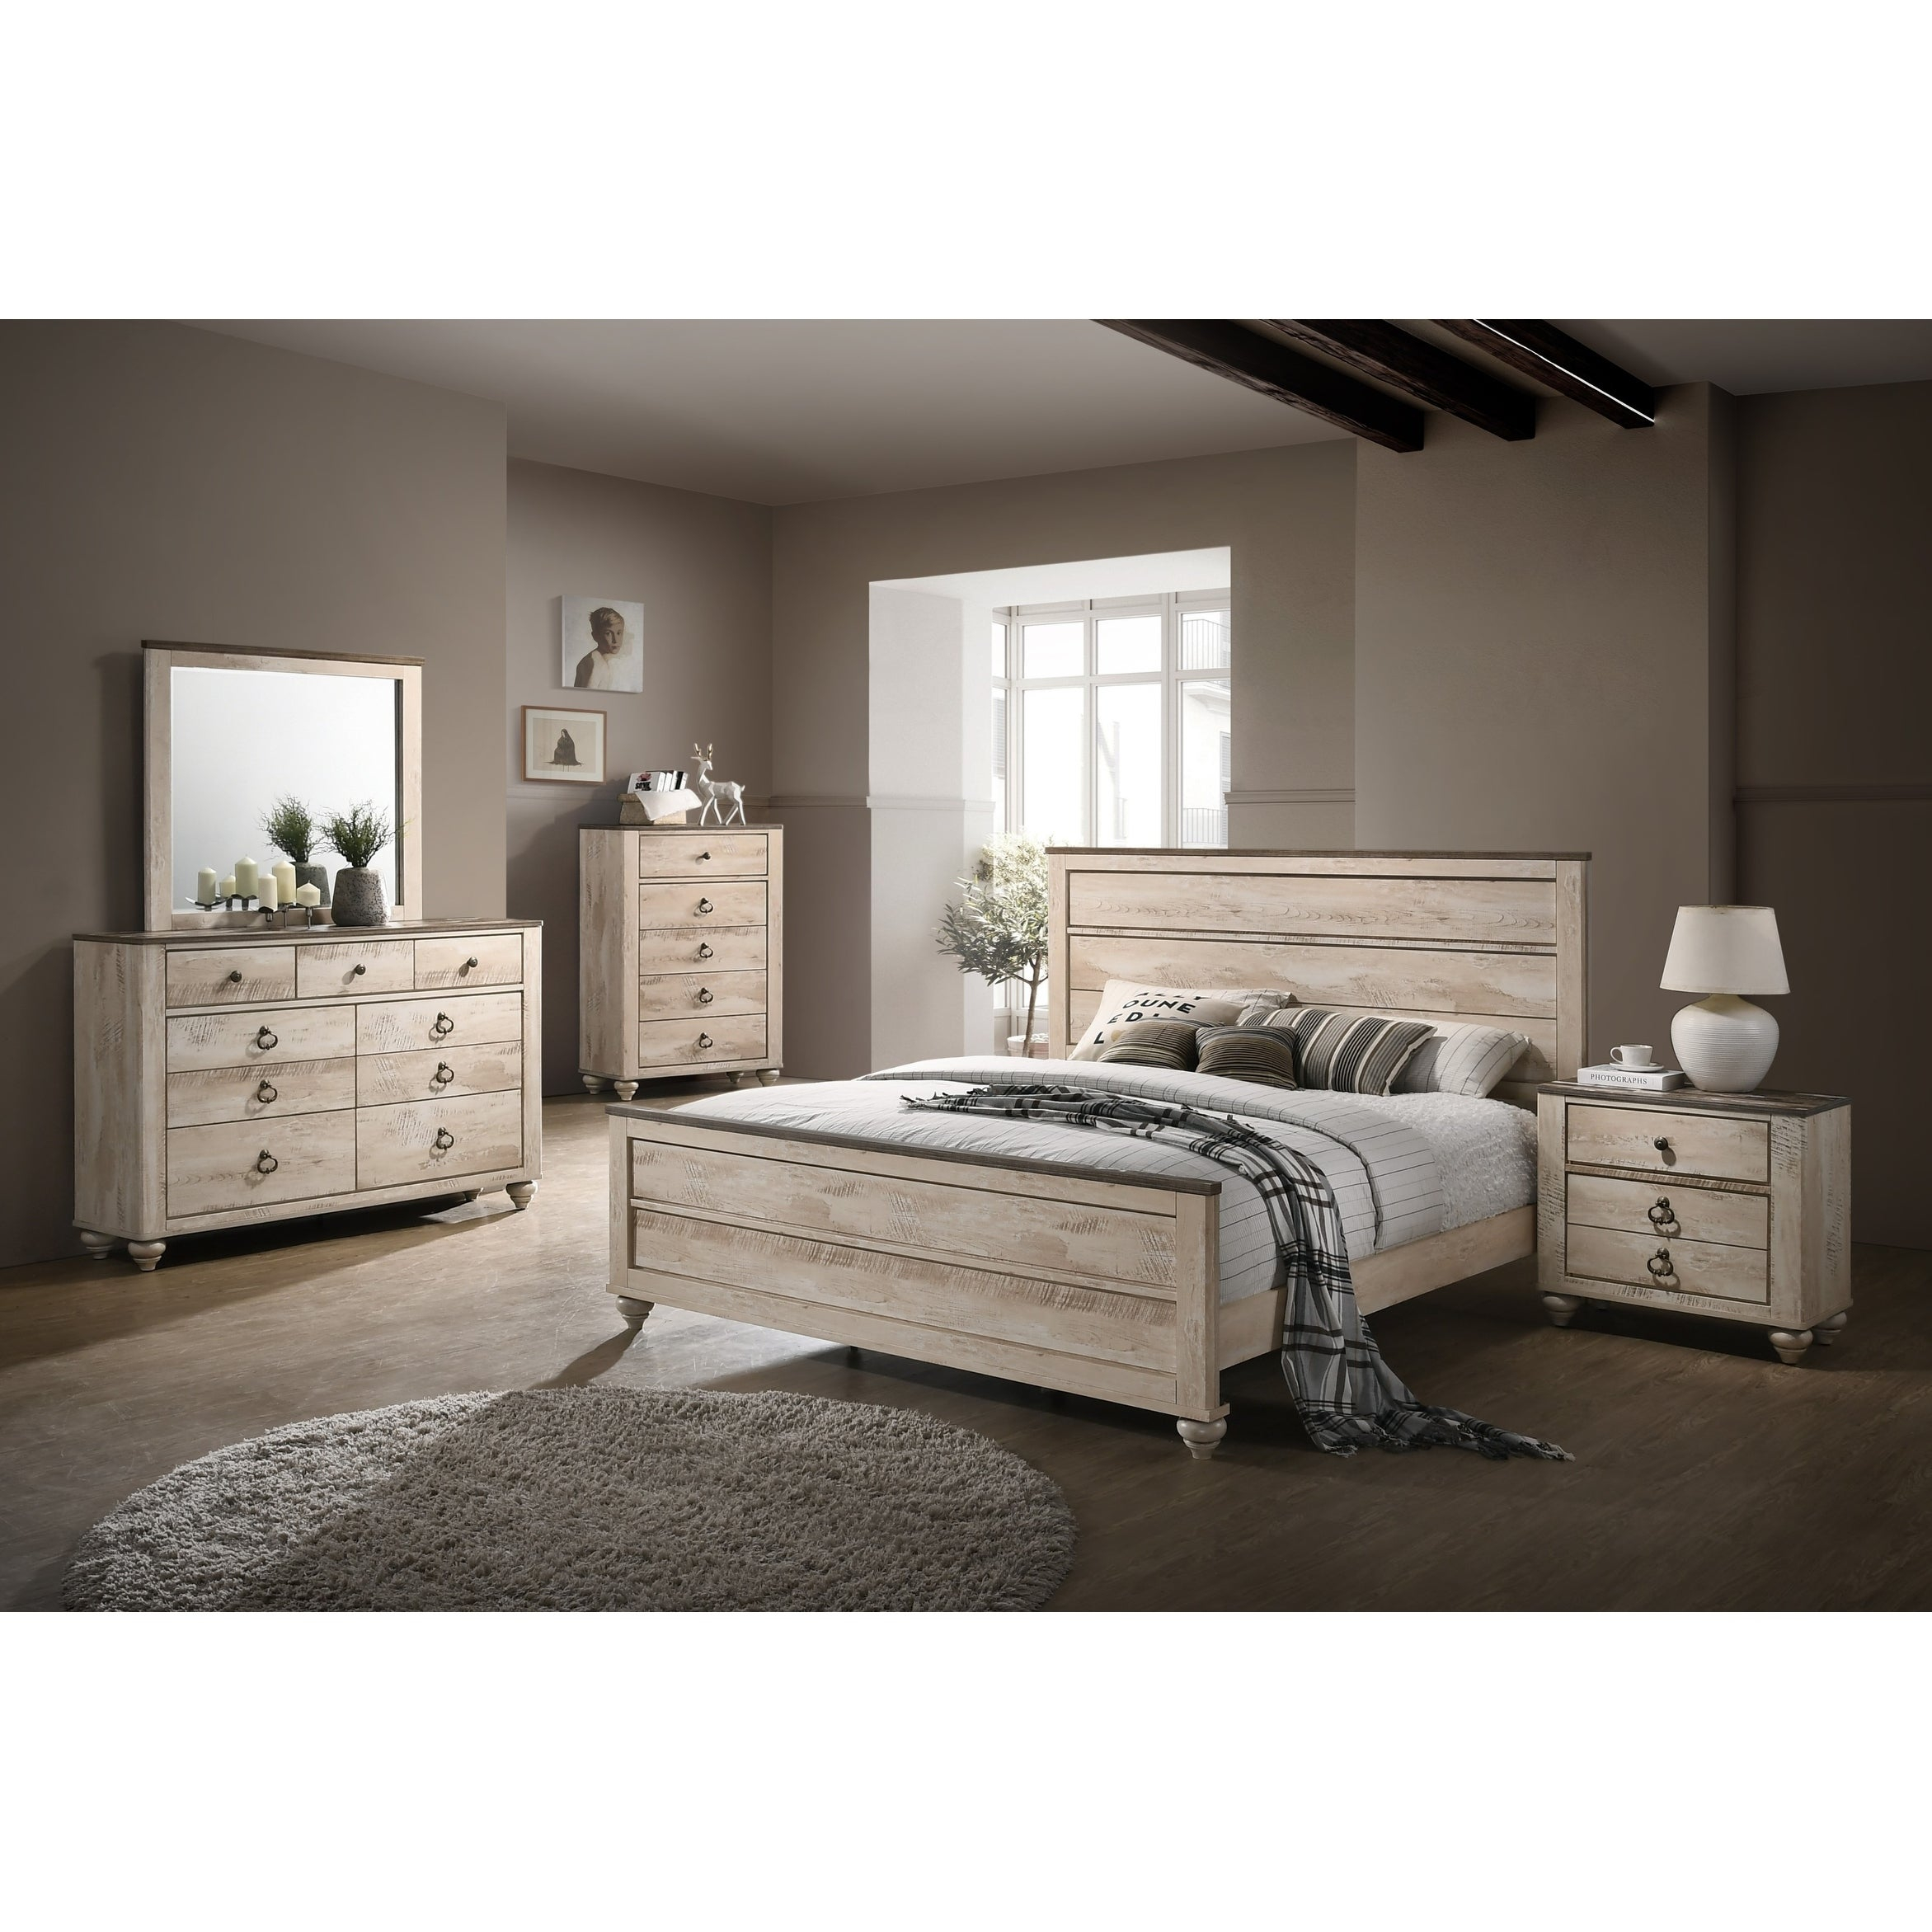 Imerland Contemporary White Wash Finish 5 Piece Bedroom Set King intended for proportions 2343 X 2343